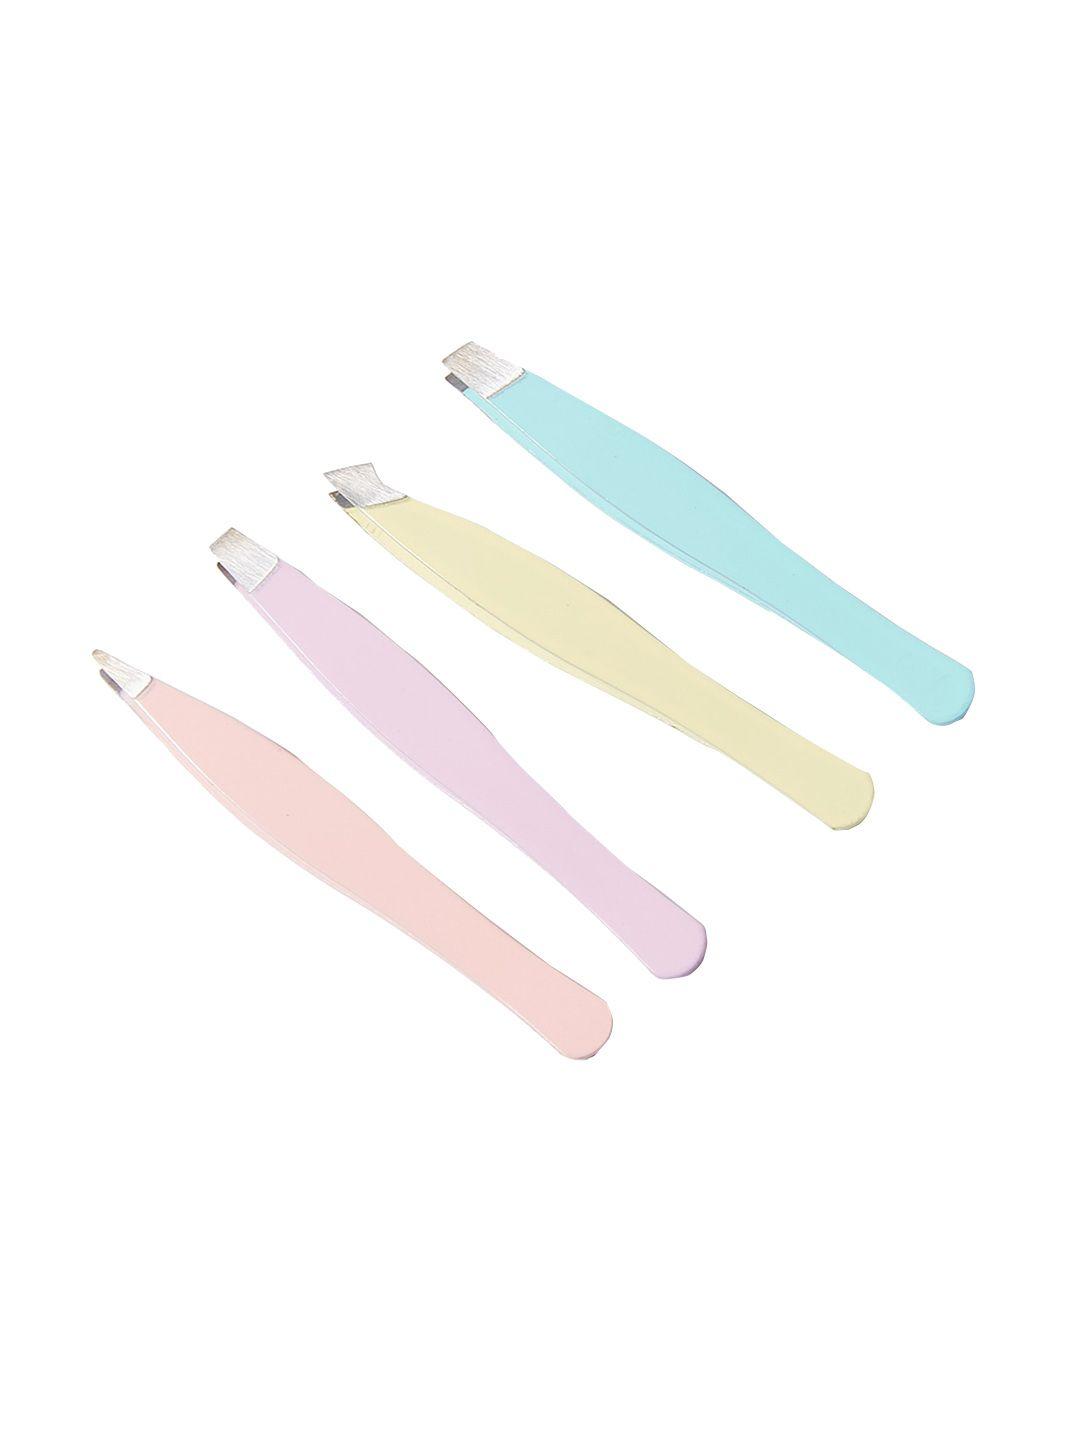 forever 21 women set of 4 beauty accessory